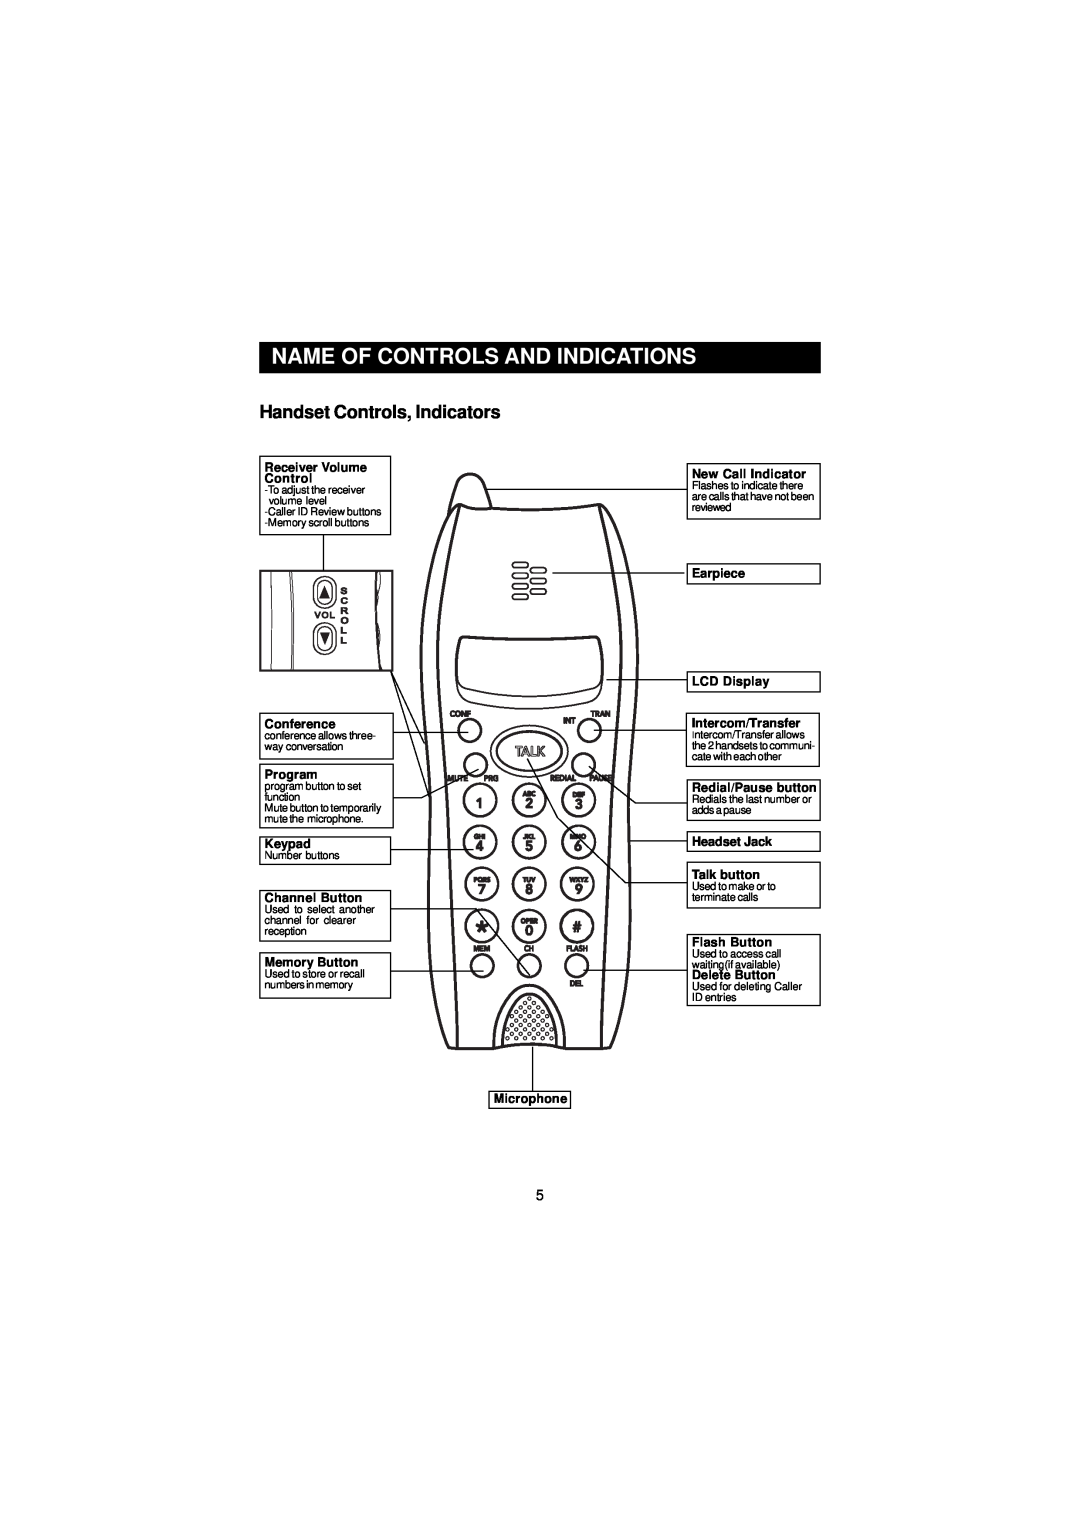 Southwestern Bell GH3210 owner manual Name Of Controls And Indications, Handset Controls, Indicators 